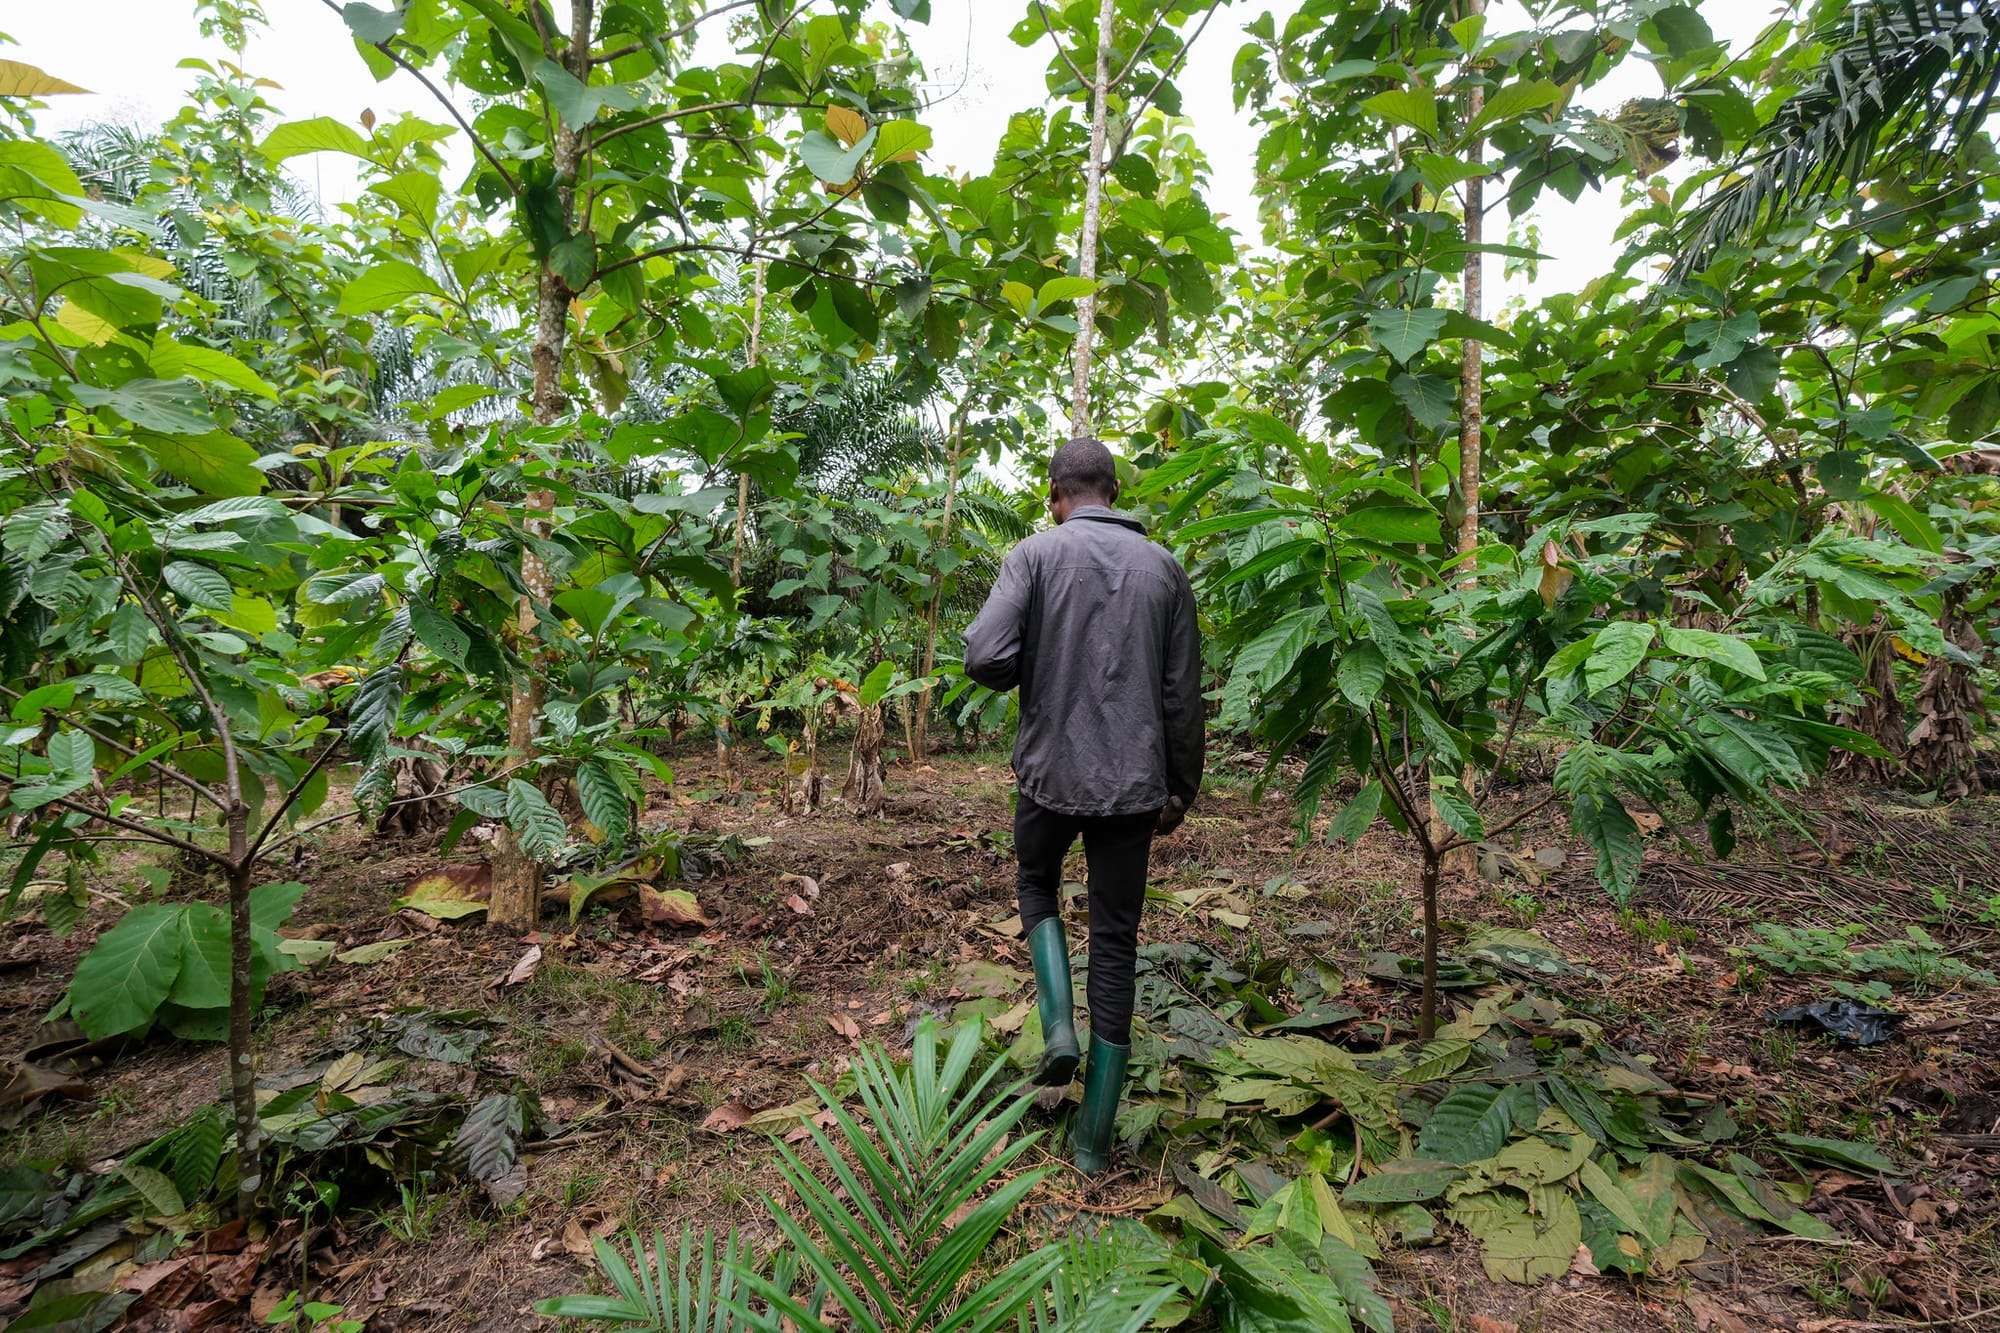 Seen from behind, a person in green boots walks into a forest plantation